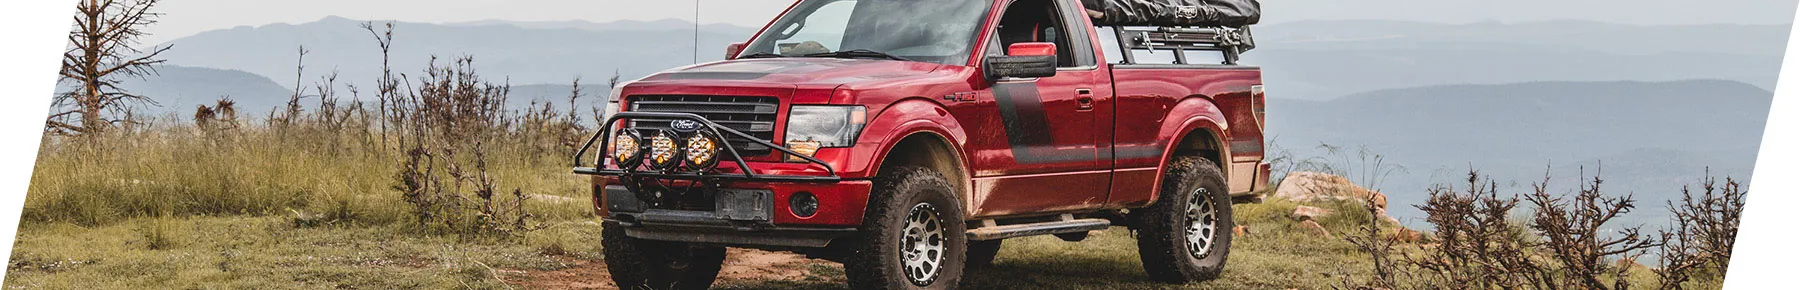 2011-2014 F150 3.5L EcoBoost Performance Parts and Accessories